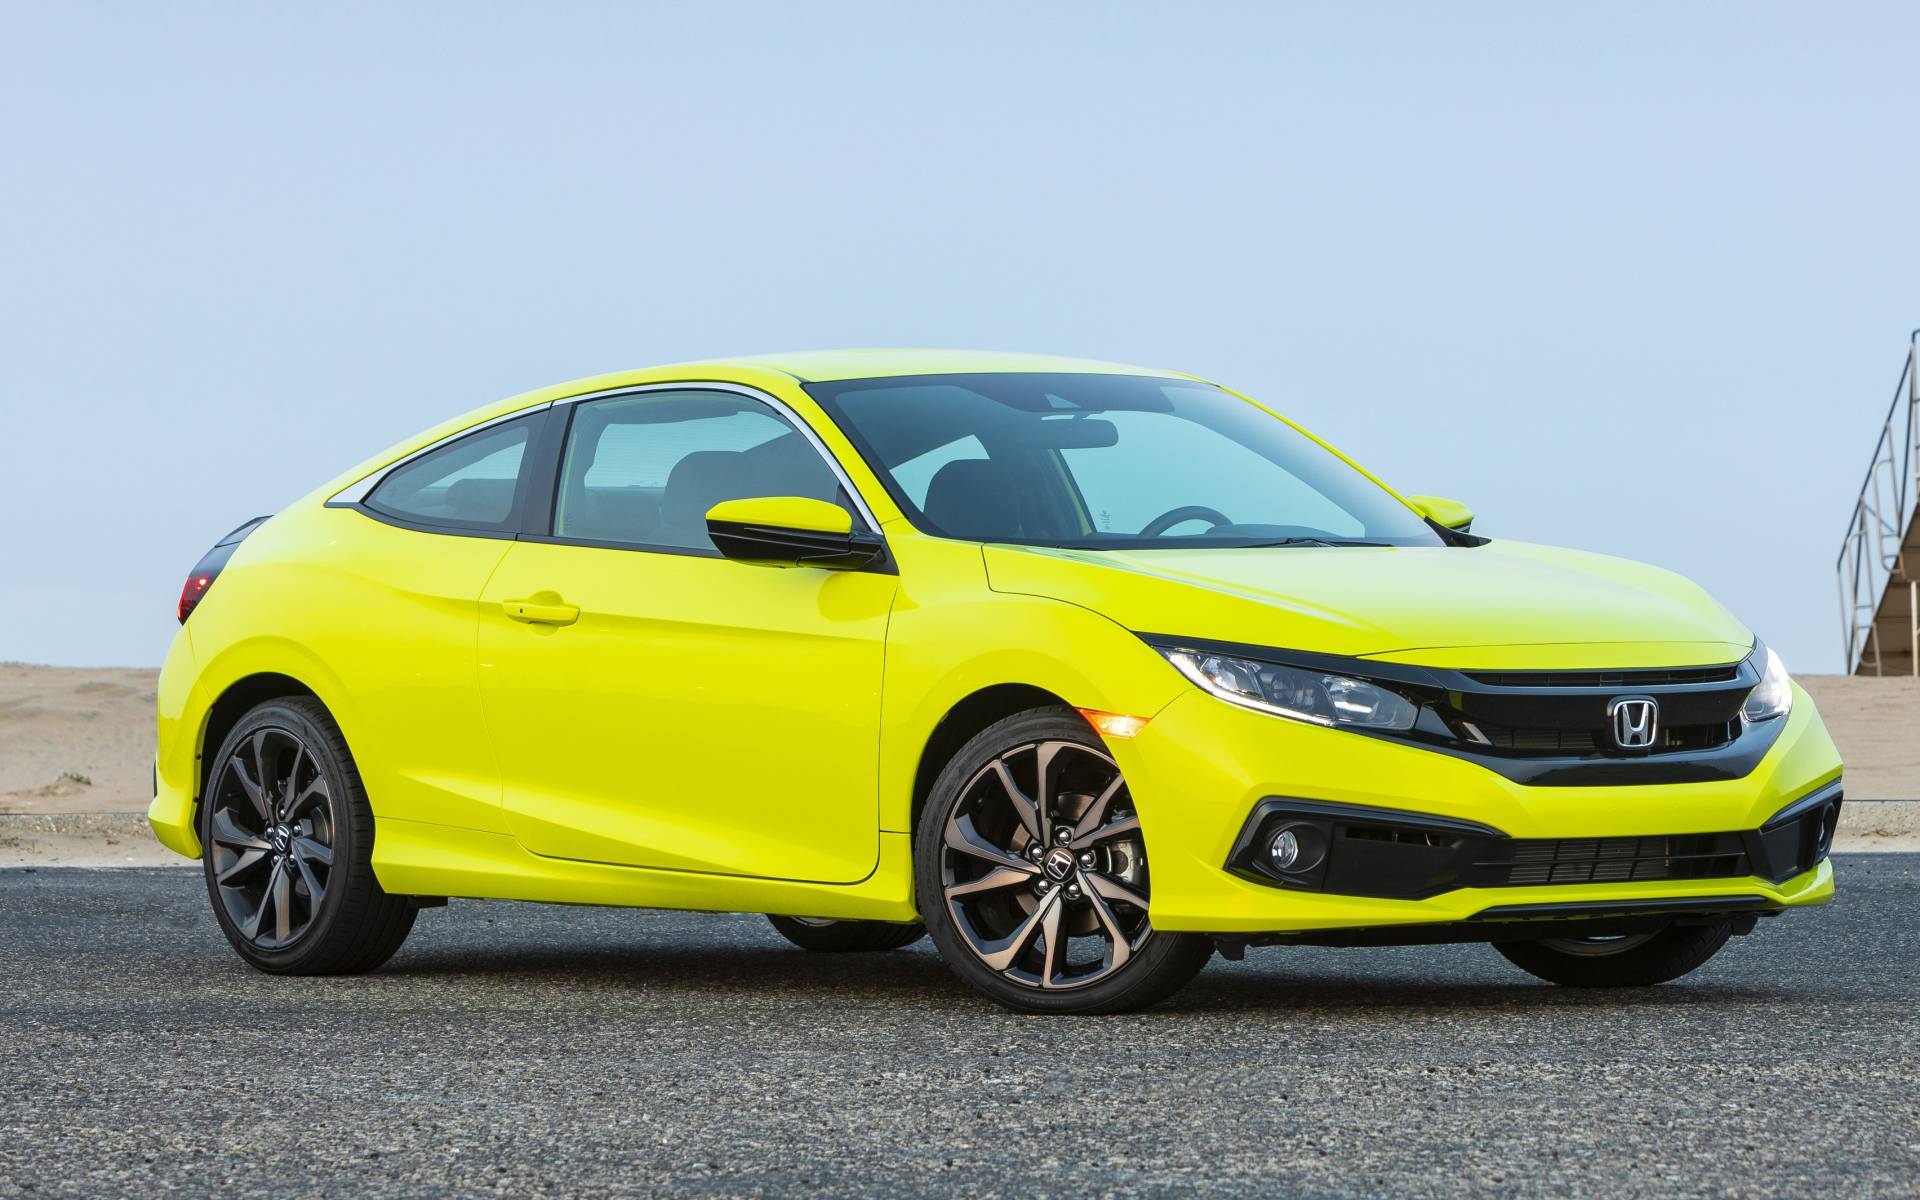 How Much Does a Honda Civic Weight